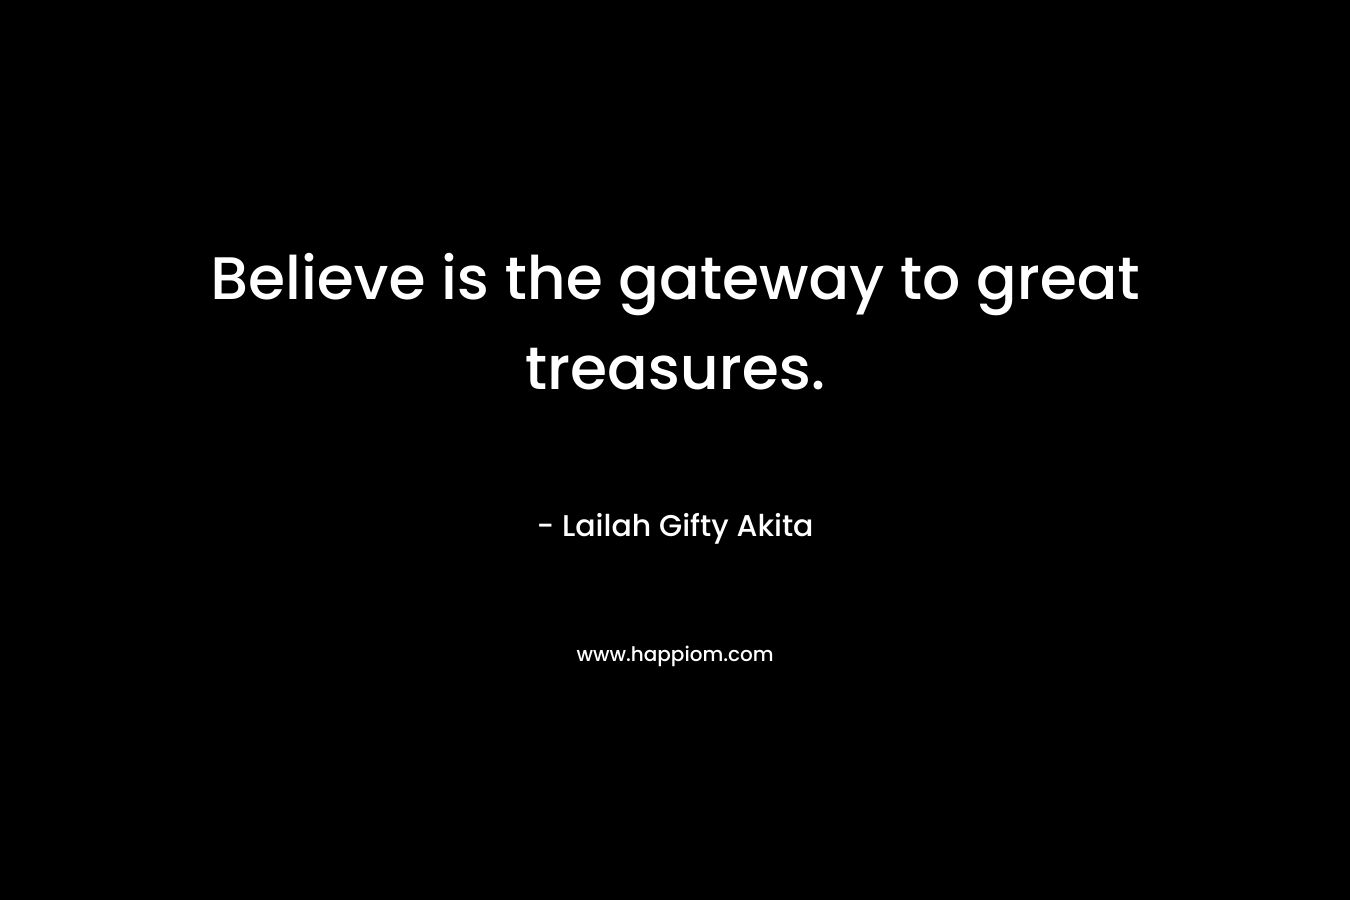 Believe is the gateway to great treasures.